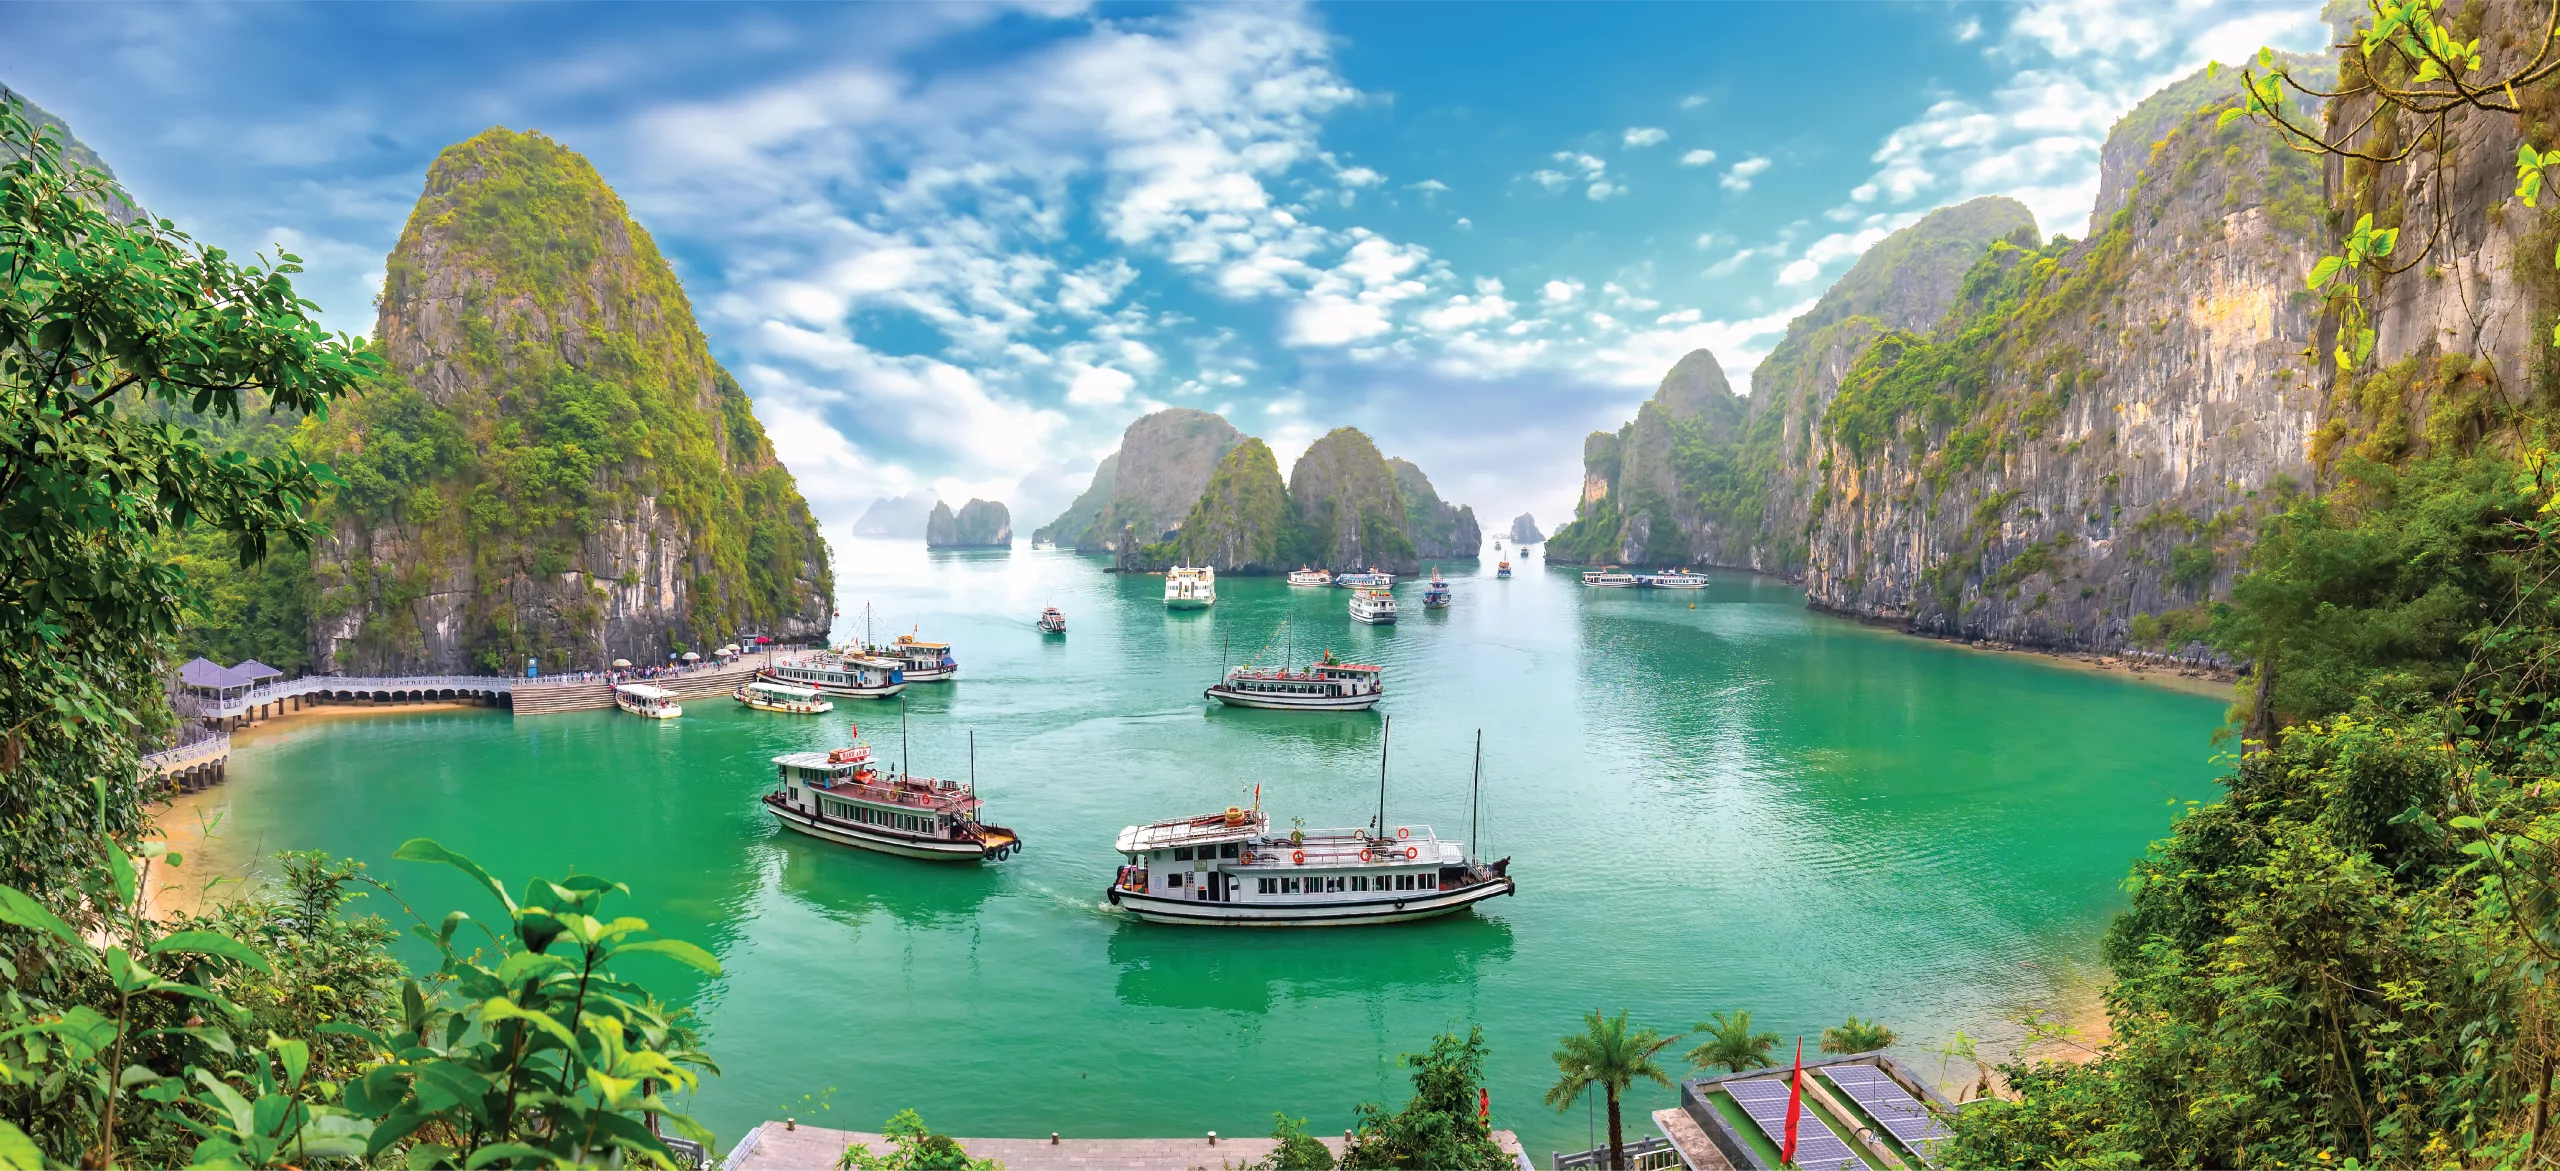 5 Popular Activities Included in the 1 Night Halong Bay Cruise at Vietnam